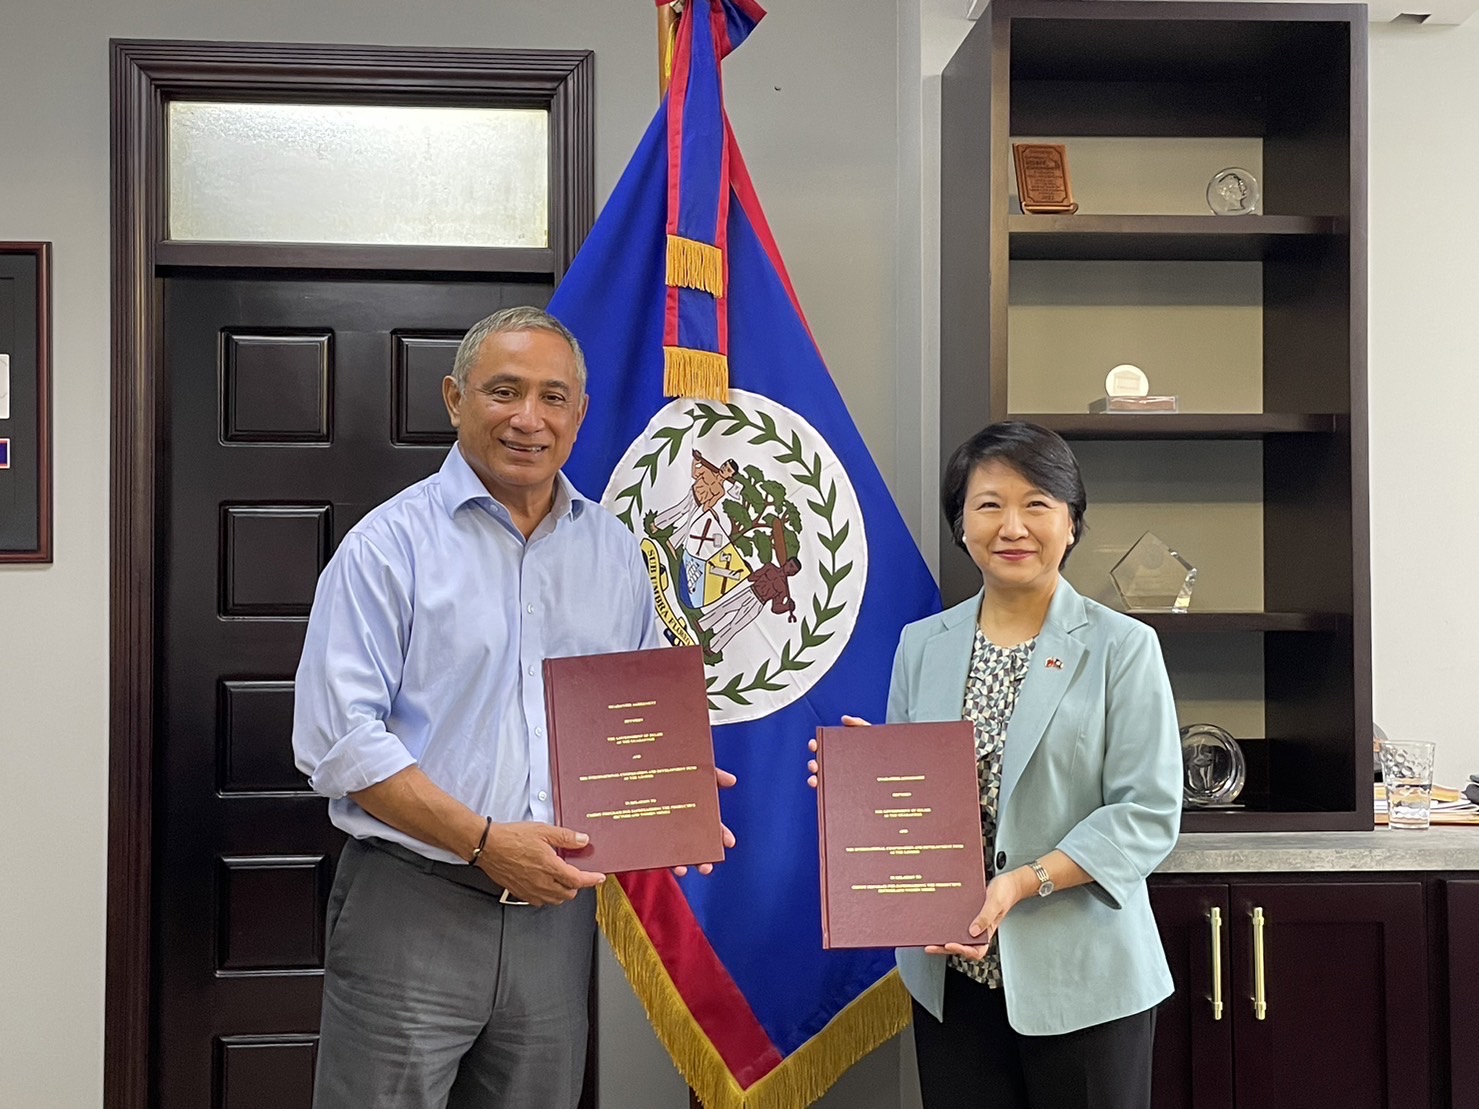 TaiwanICDF-IDB Collaboration on the Post-COVID Economic Recovery of MSMEs and Women’s Empowerment in Belize